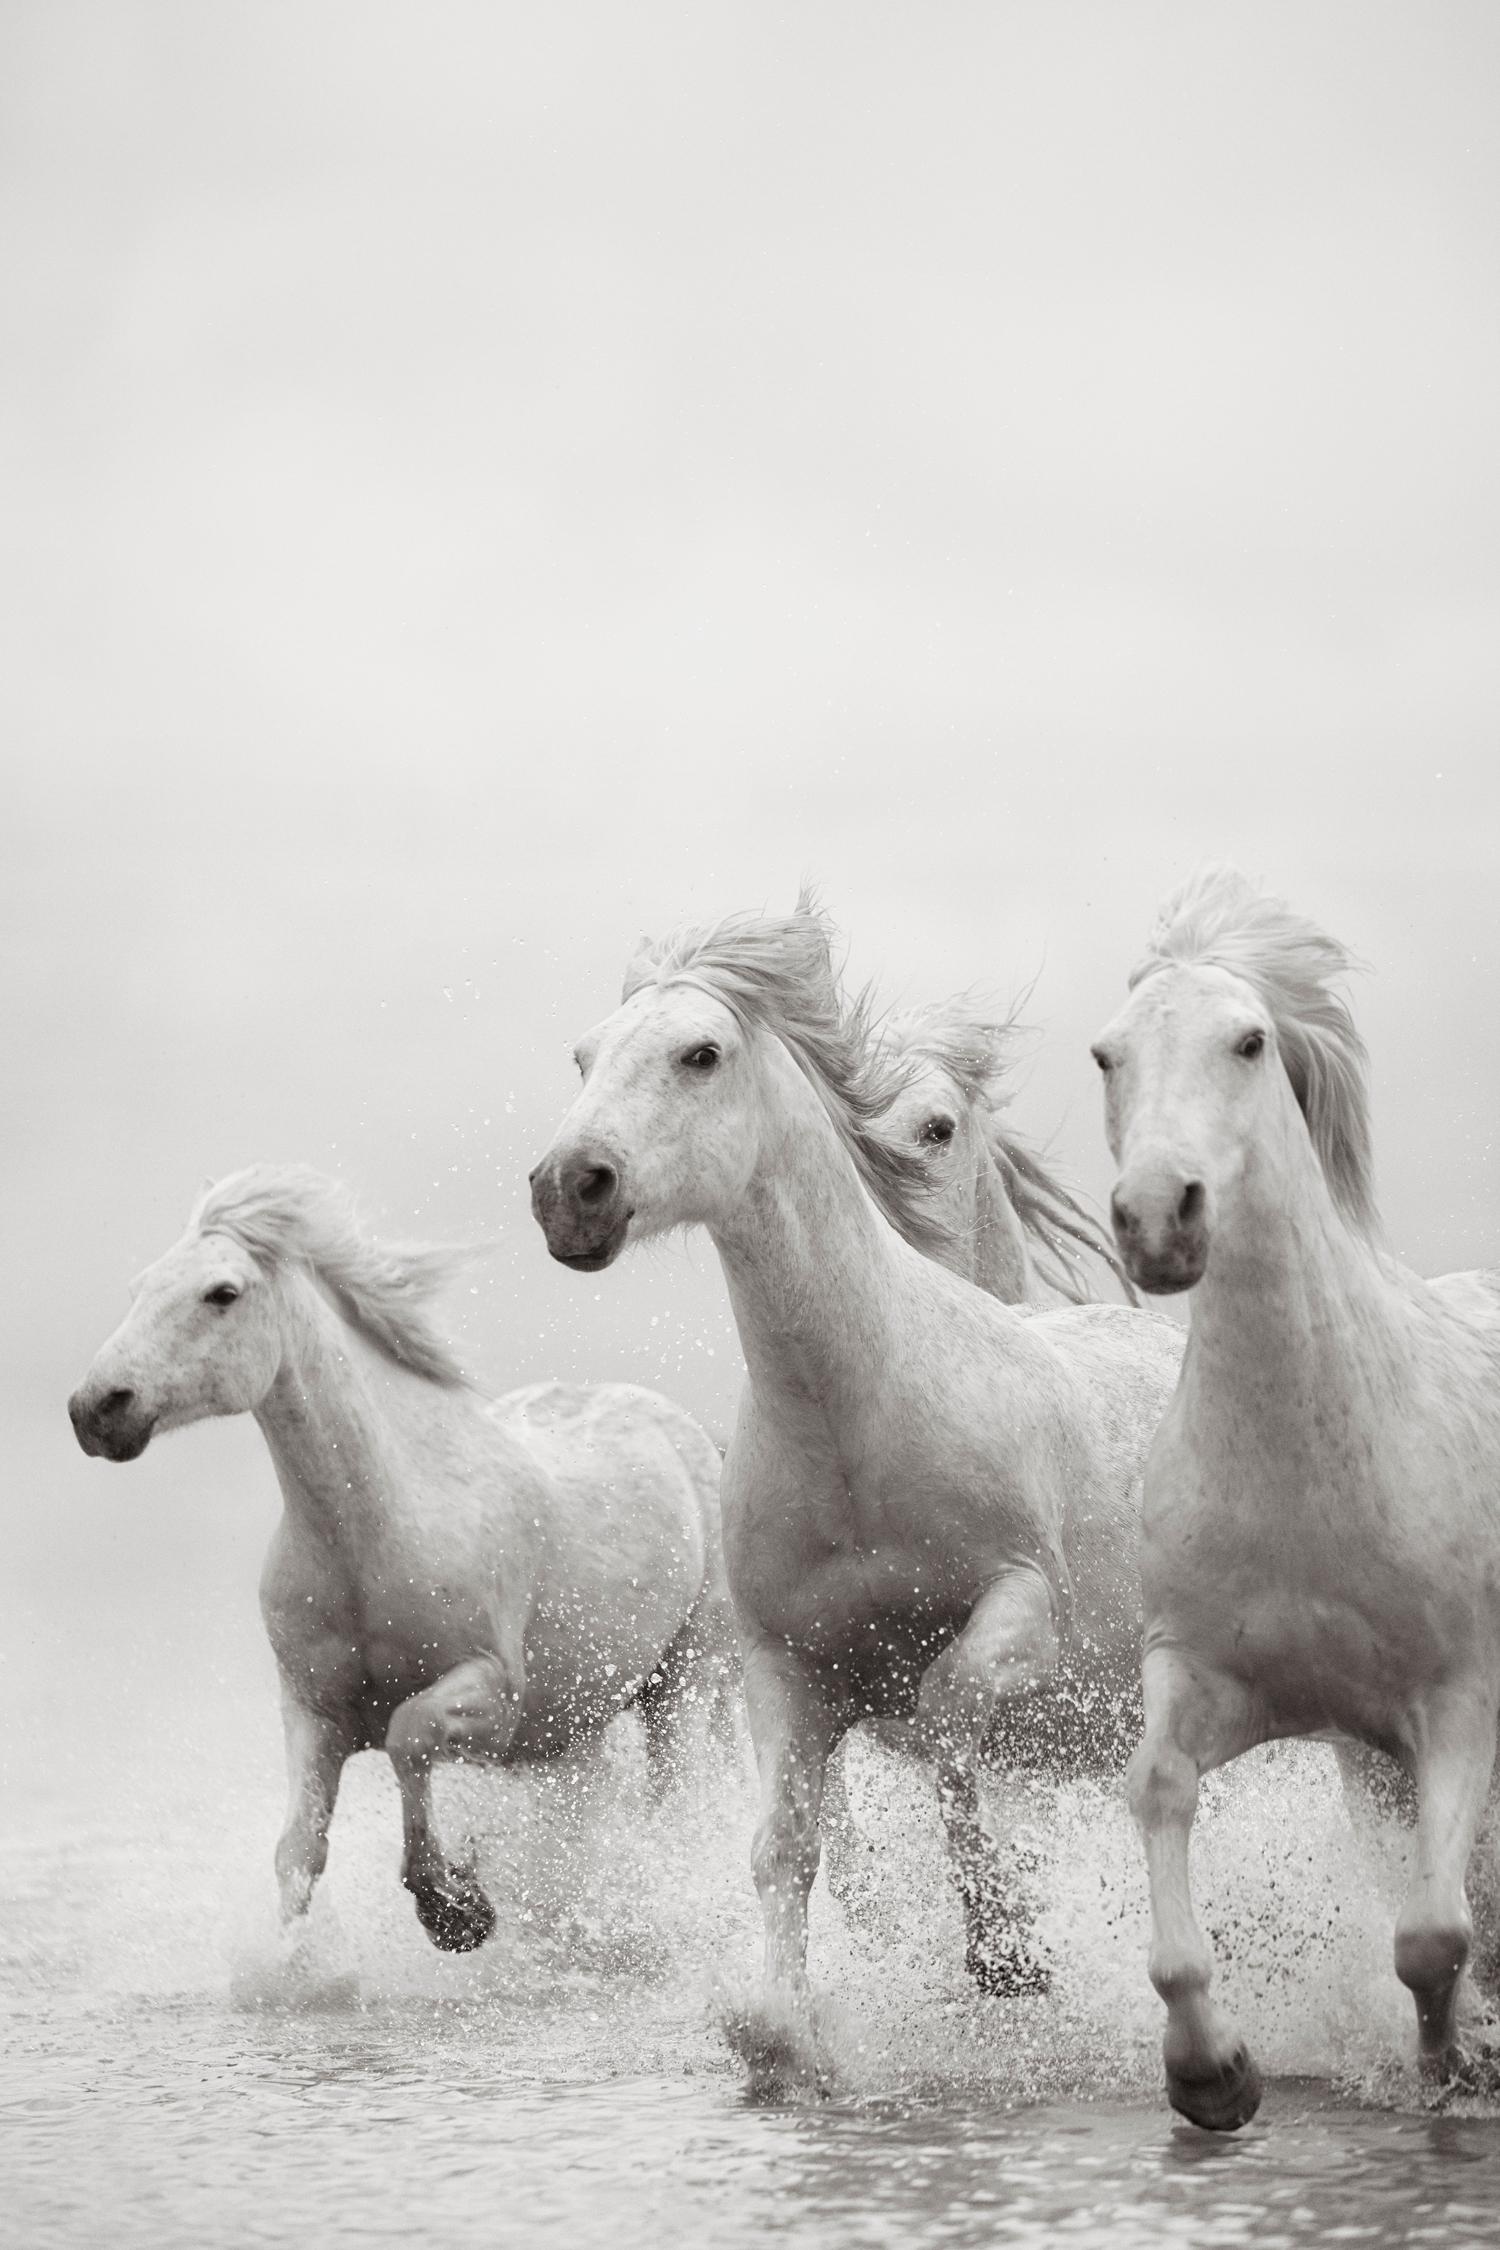 Drew Doggett Black and White Photograph - All-White Camargue Horses Running Through the Water, Uplifting, Ethereal